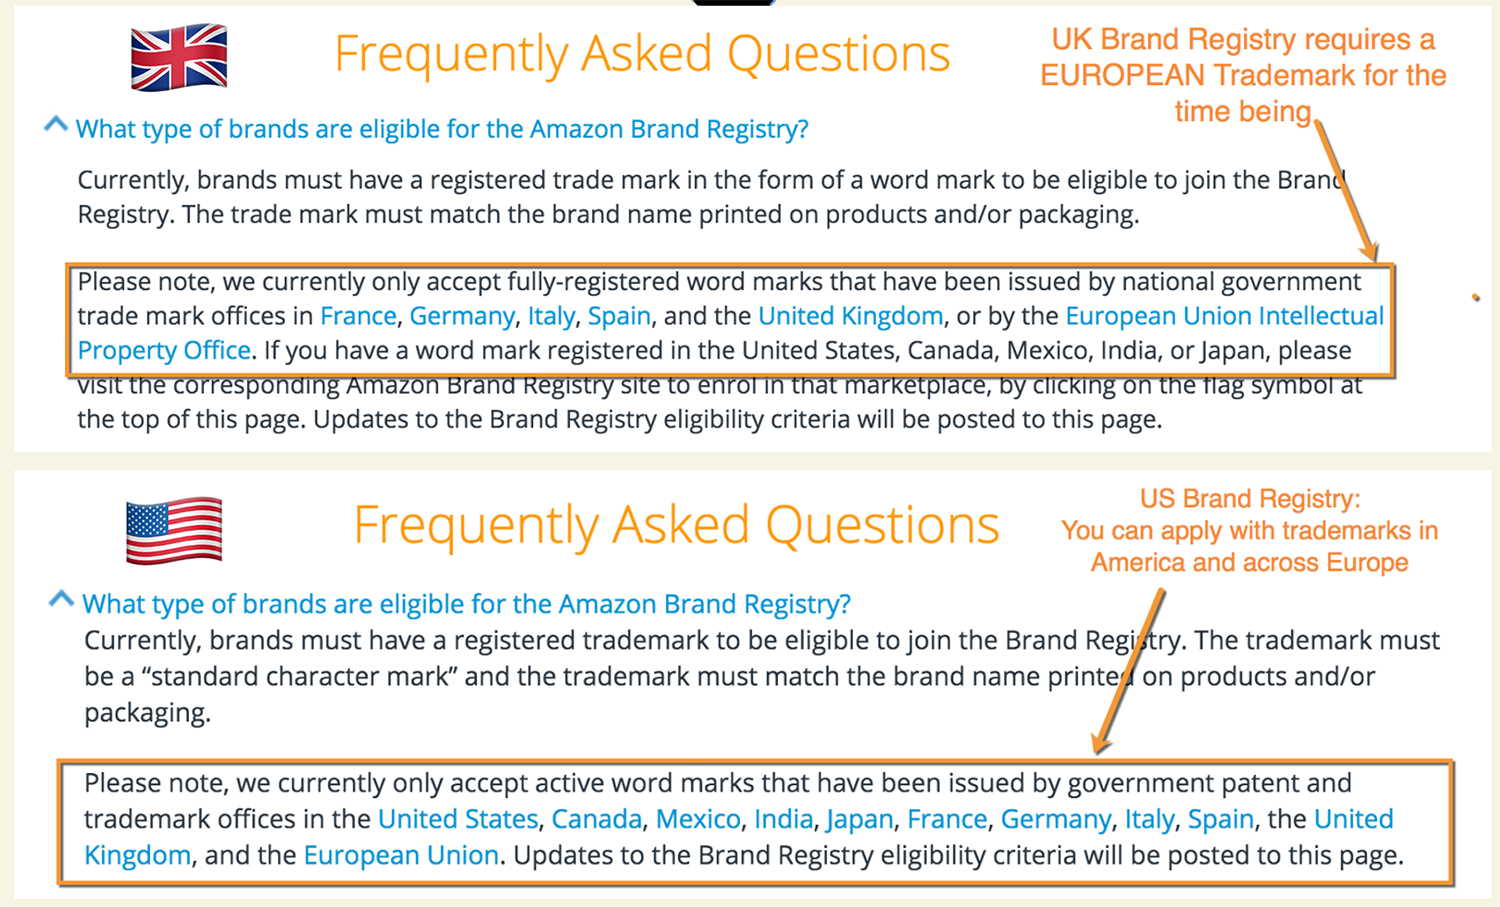 Amazon brand registry requirements in US and UK